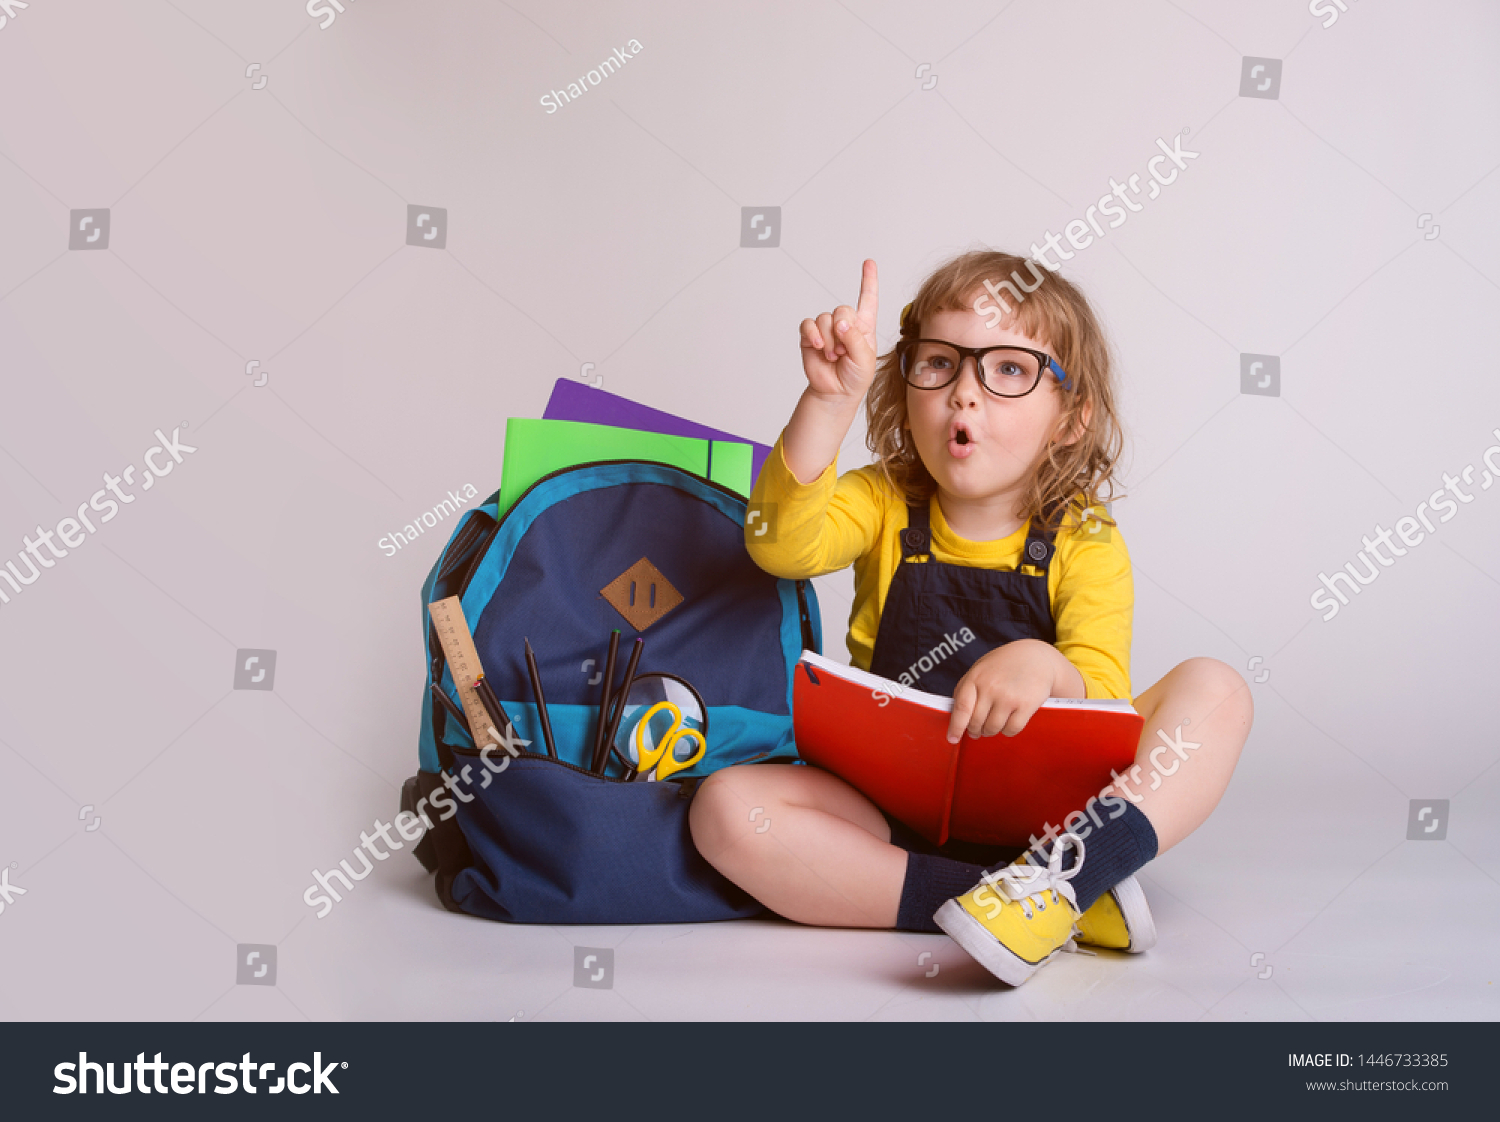 Children go back to school. Little happy  girl doing homework at home with backpack full of books, pencils. Pupil reading a book, writing and painting.  Kid is drawing. Child in glasses.  #1446733385